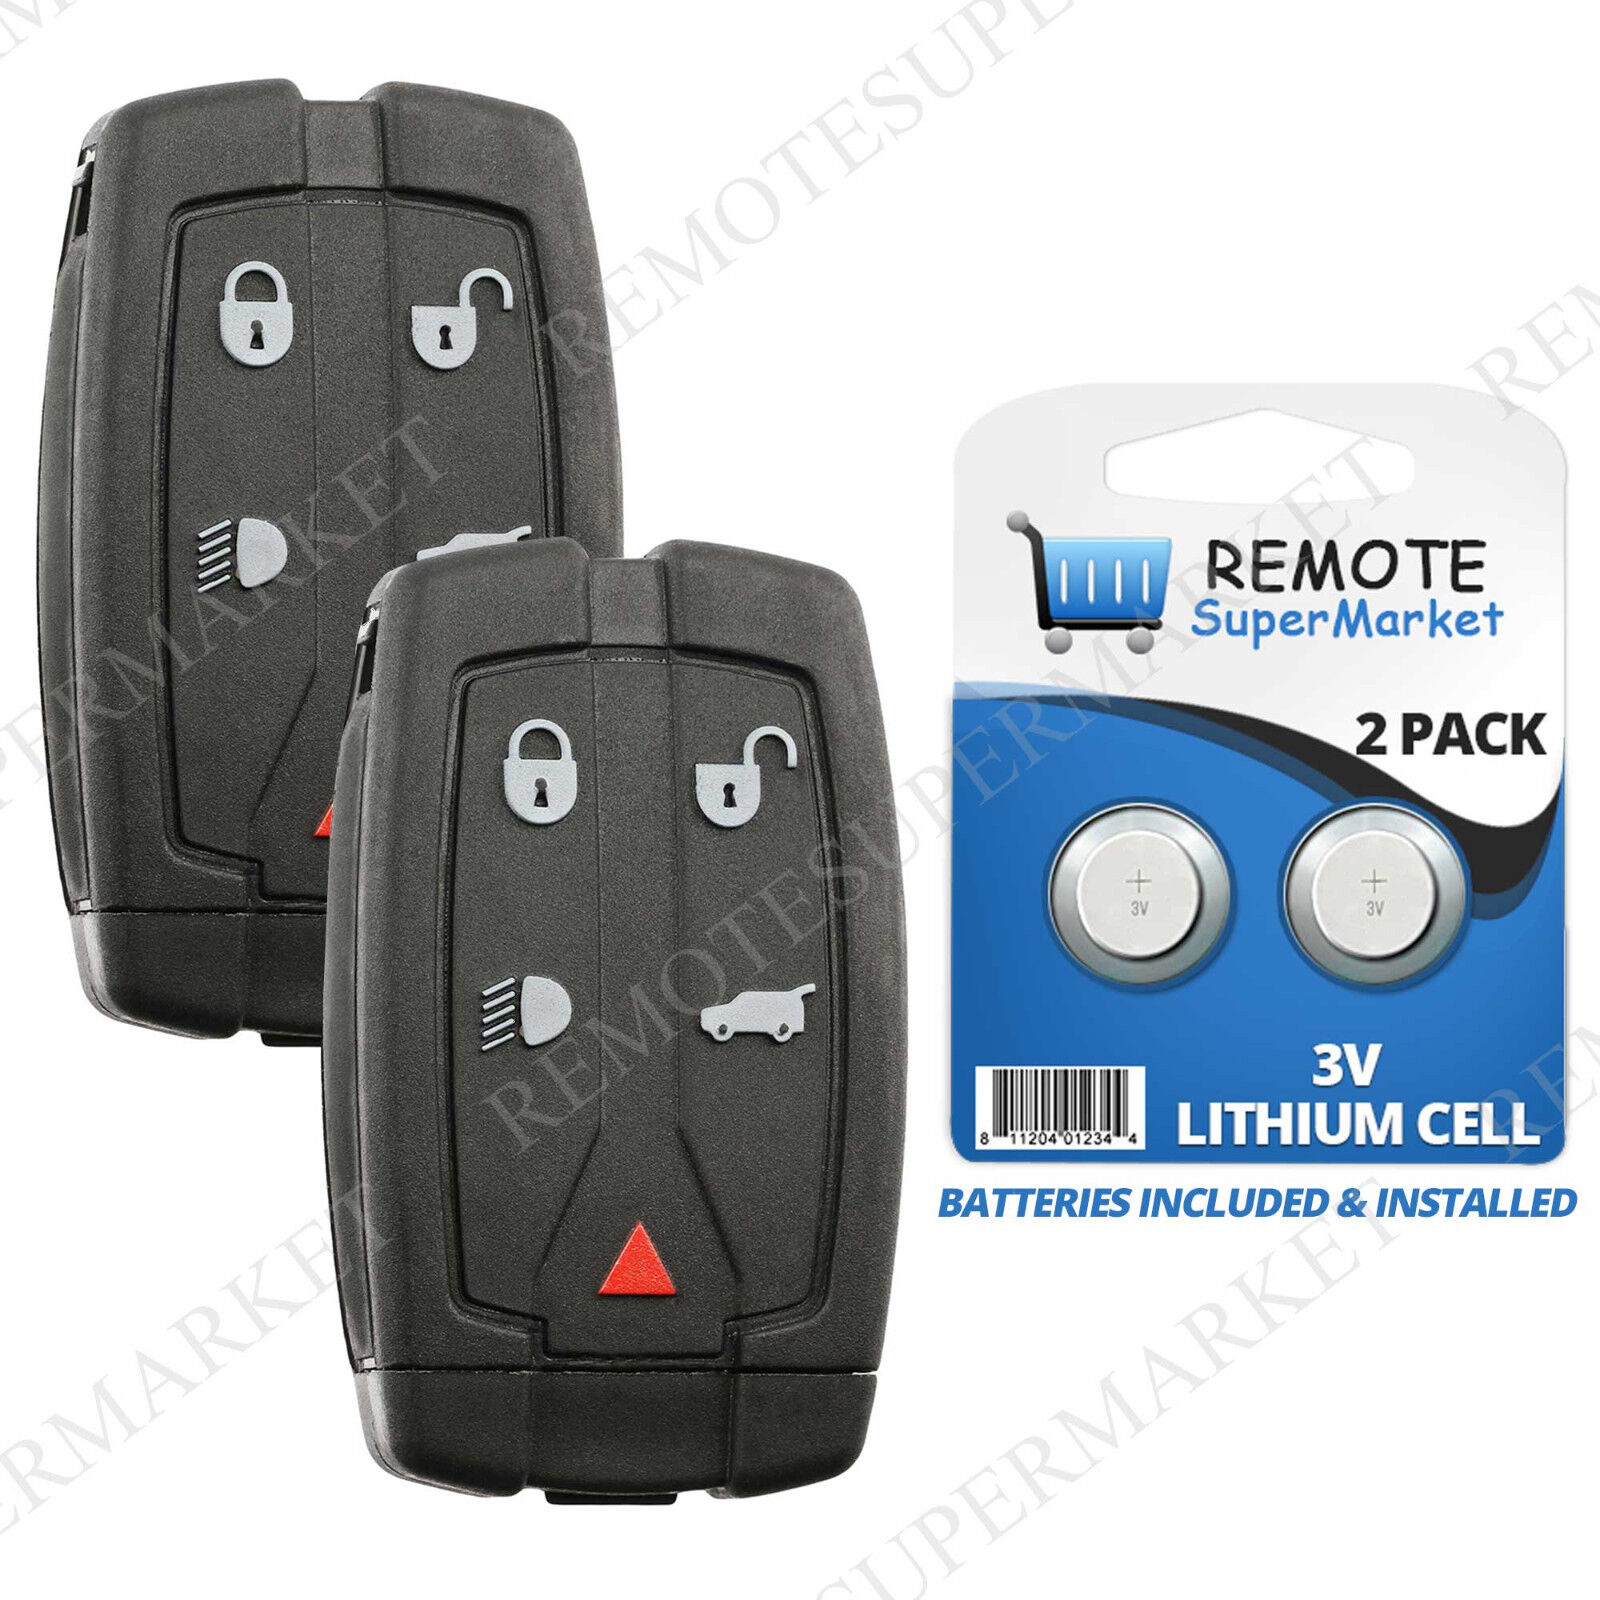 2 Replacement for Land Rover 2008-2012 LR2 Remote Key Fob Car Keyless Entry